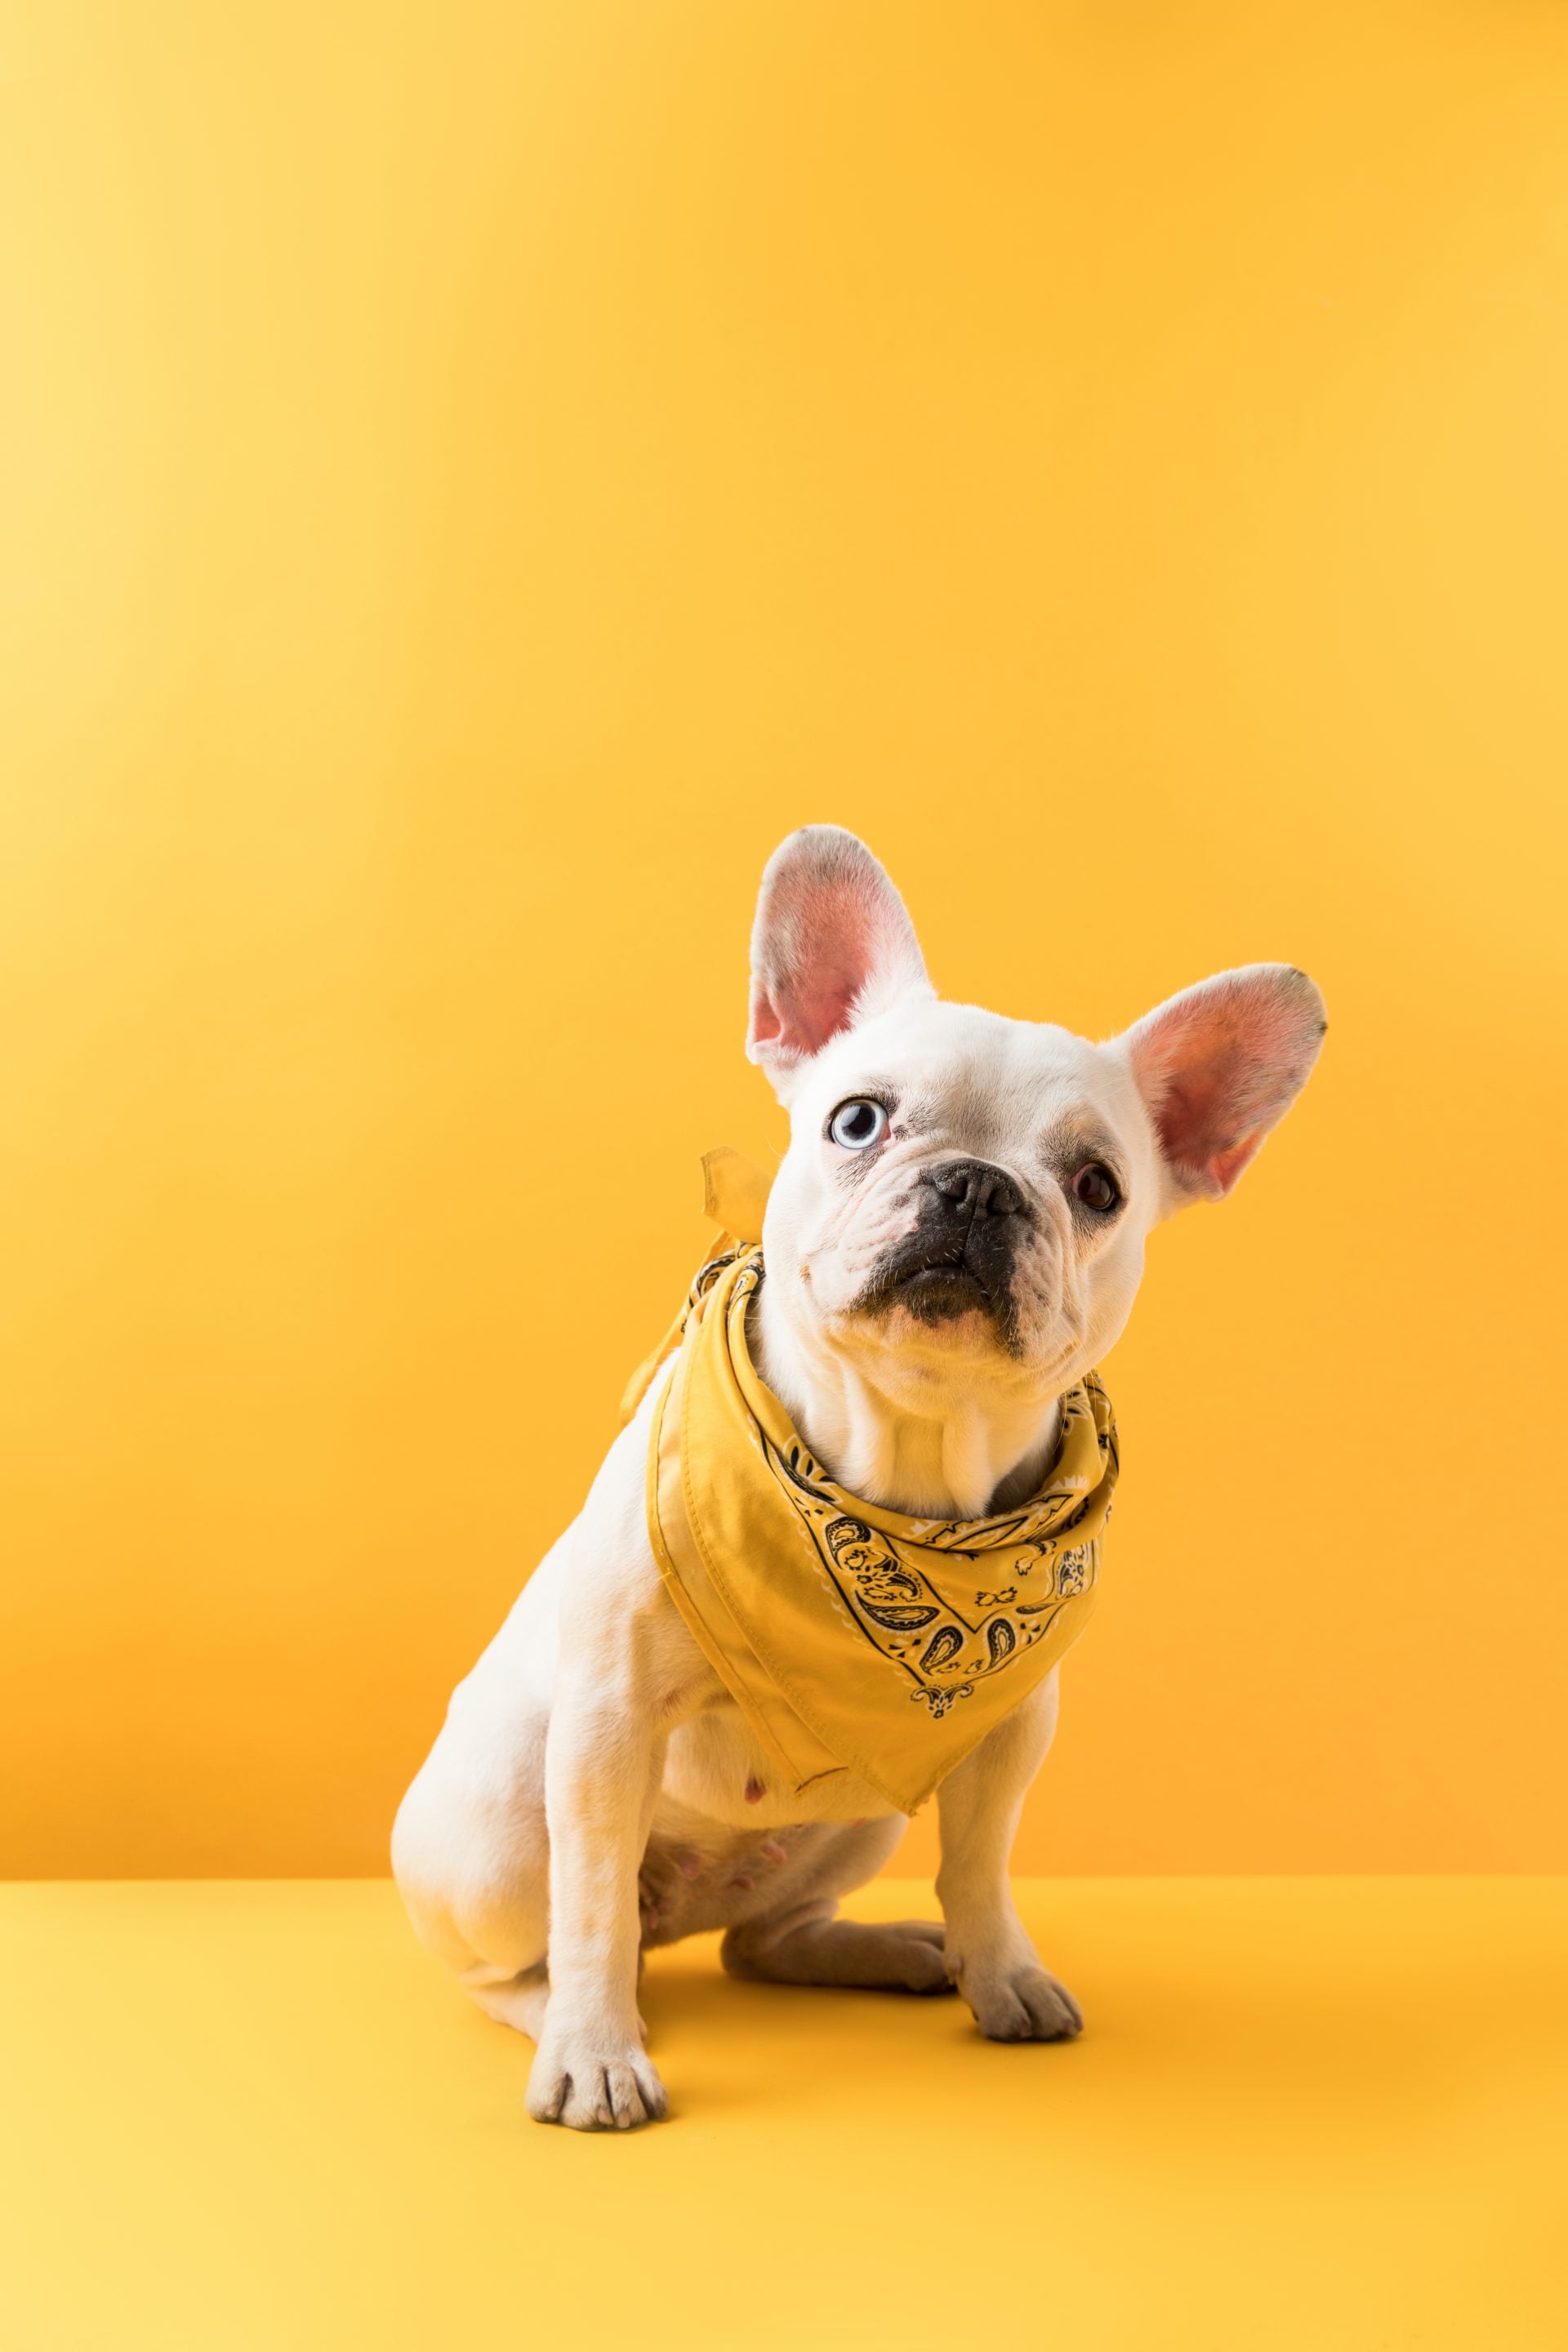 funny french bulldog sitting and looking at camera on yellow